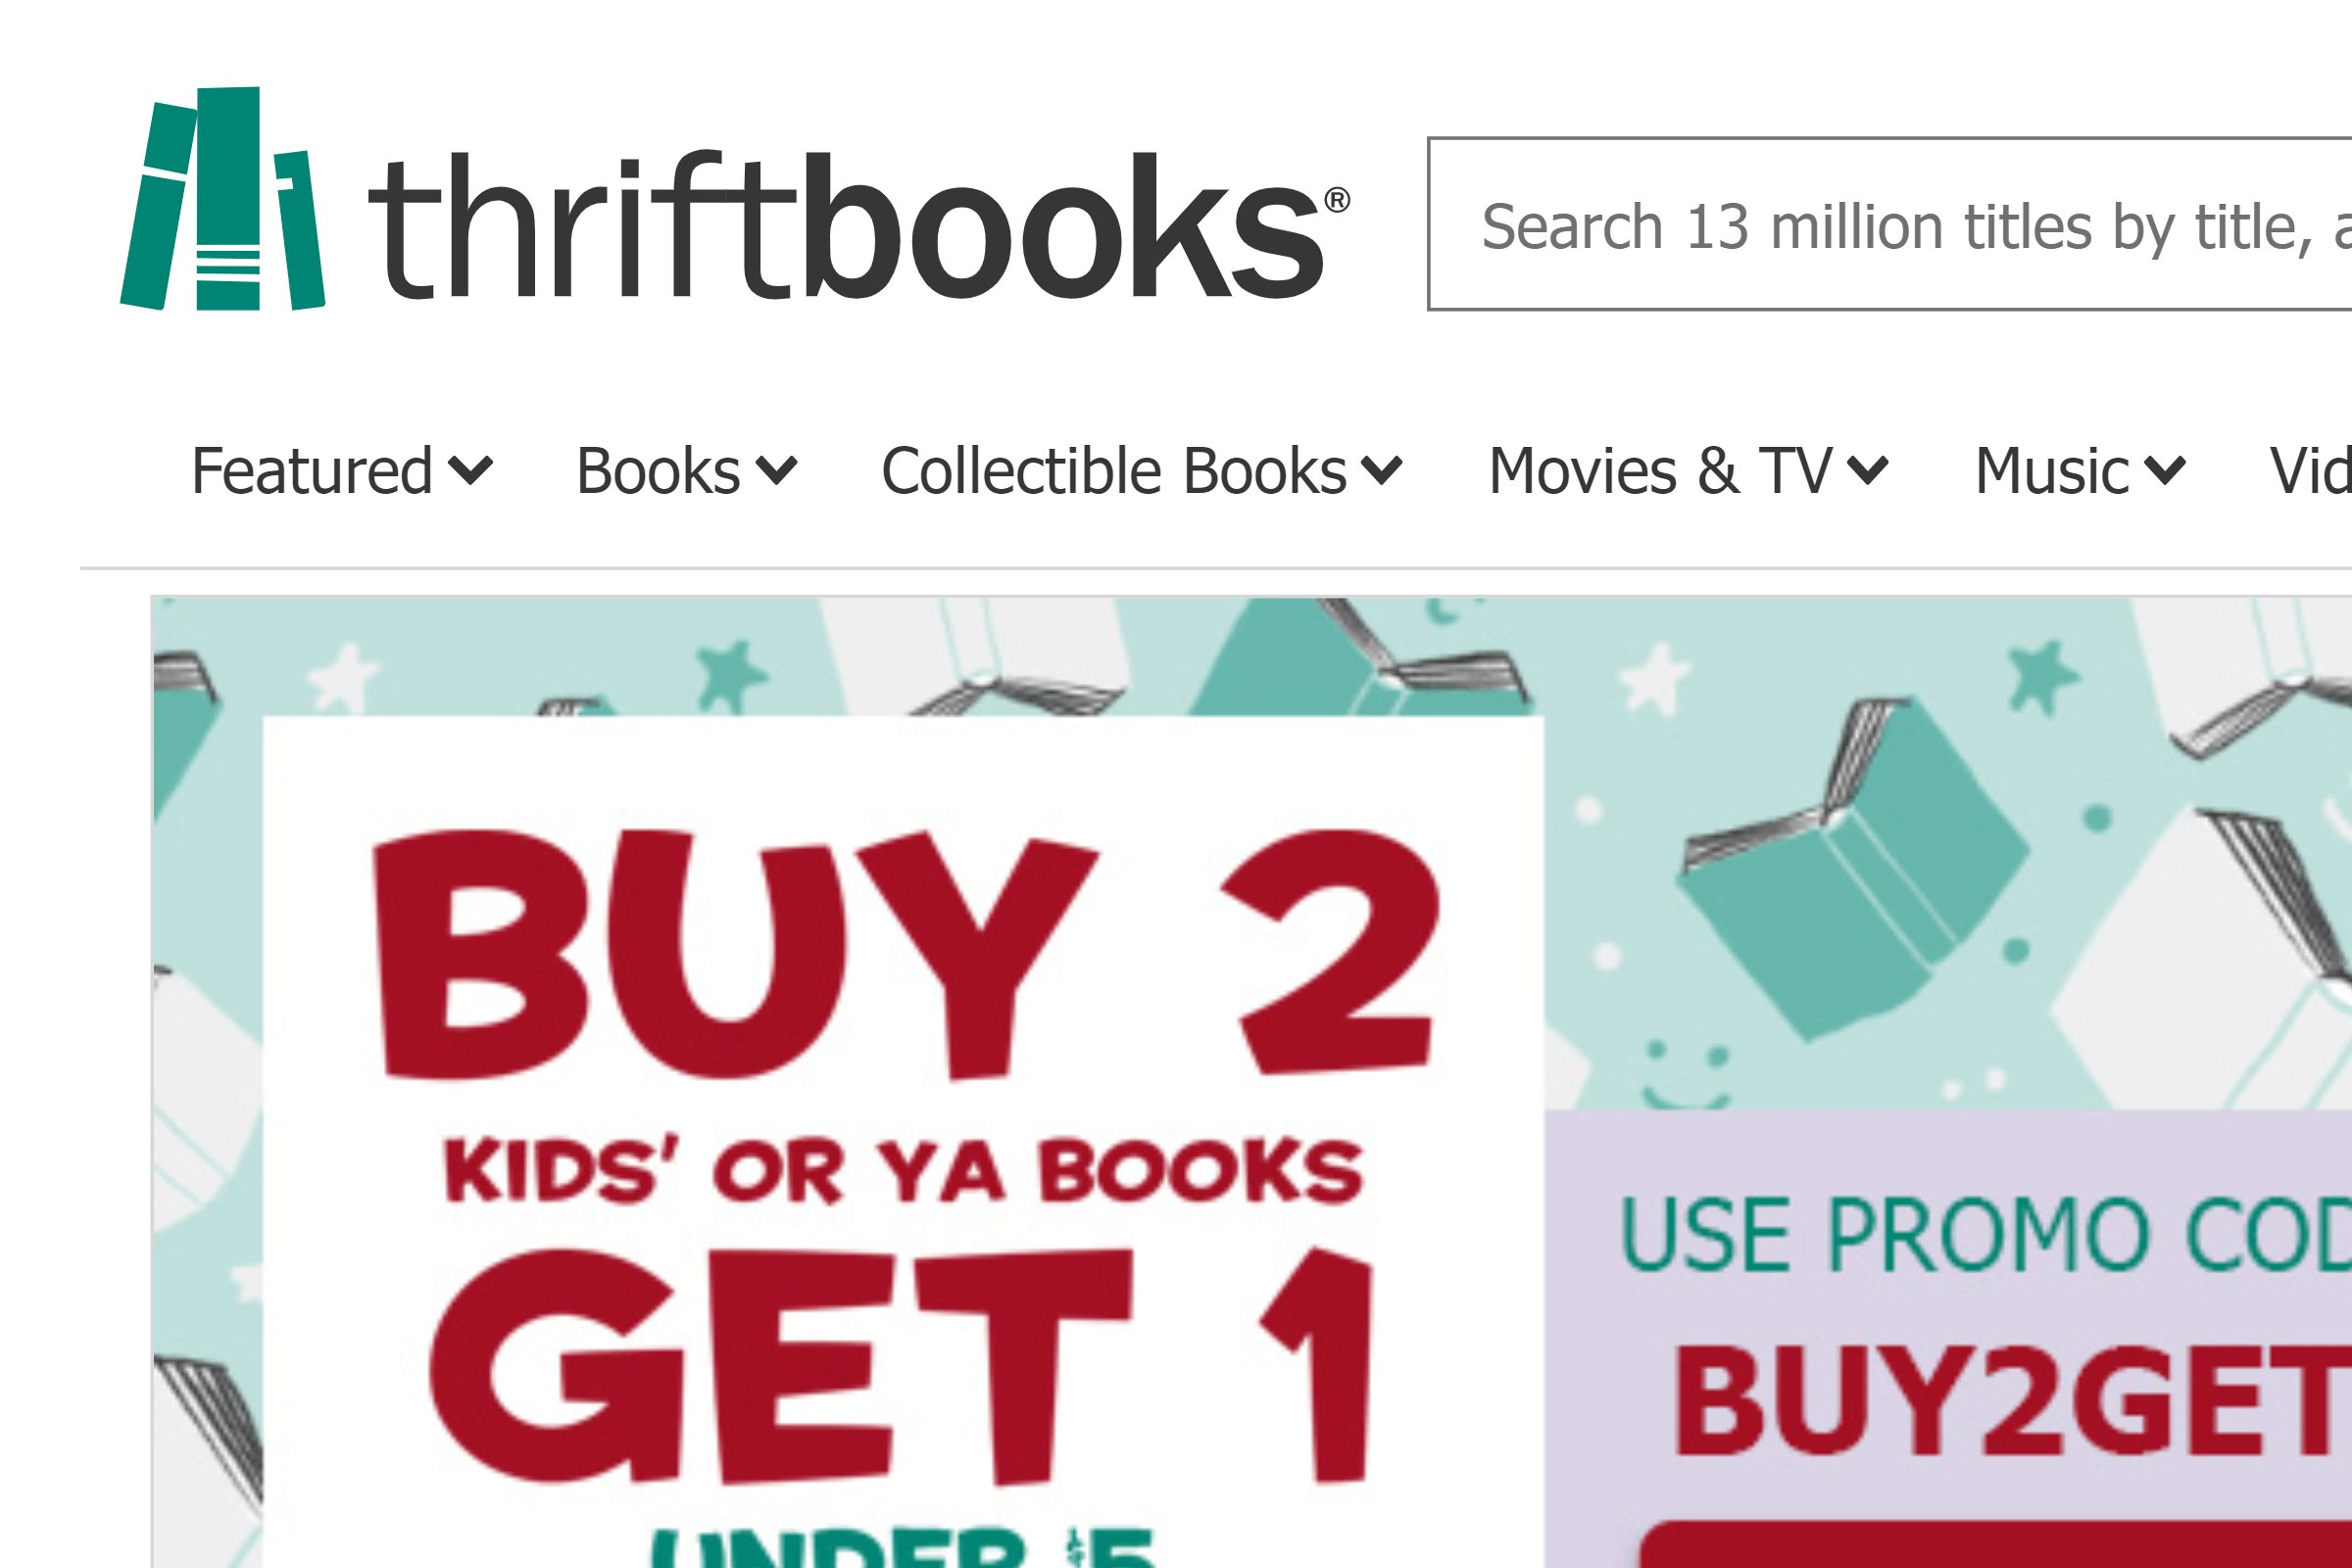 thriftbooks on ReadSomeReviews